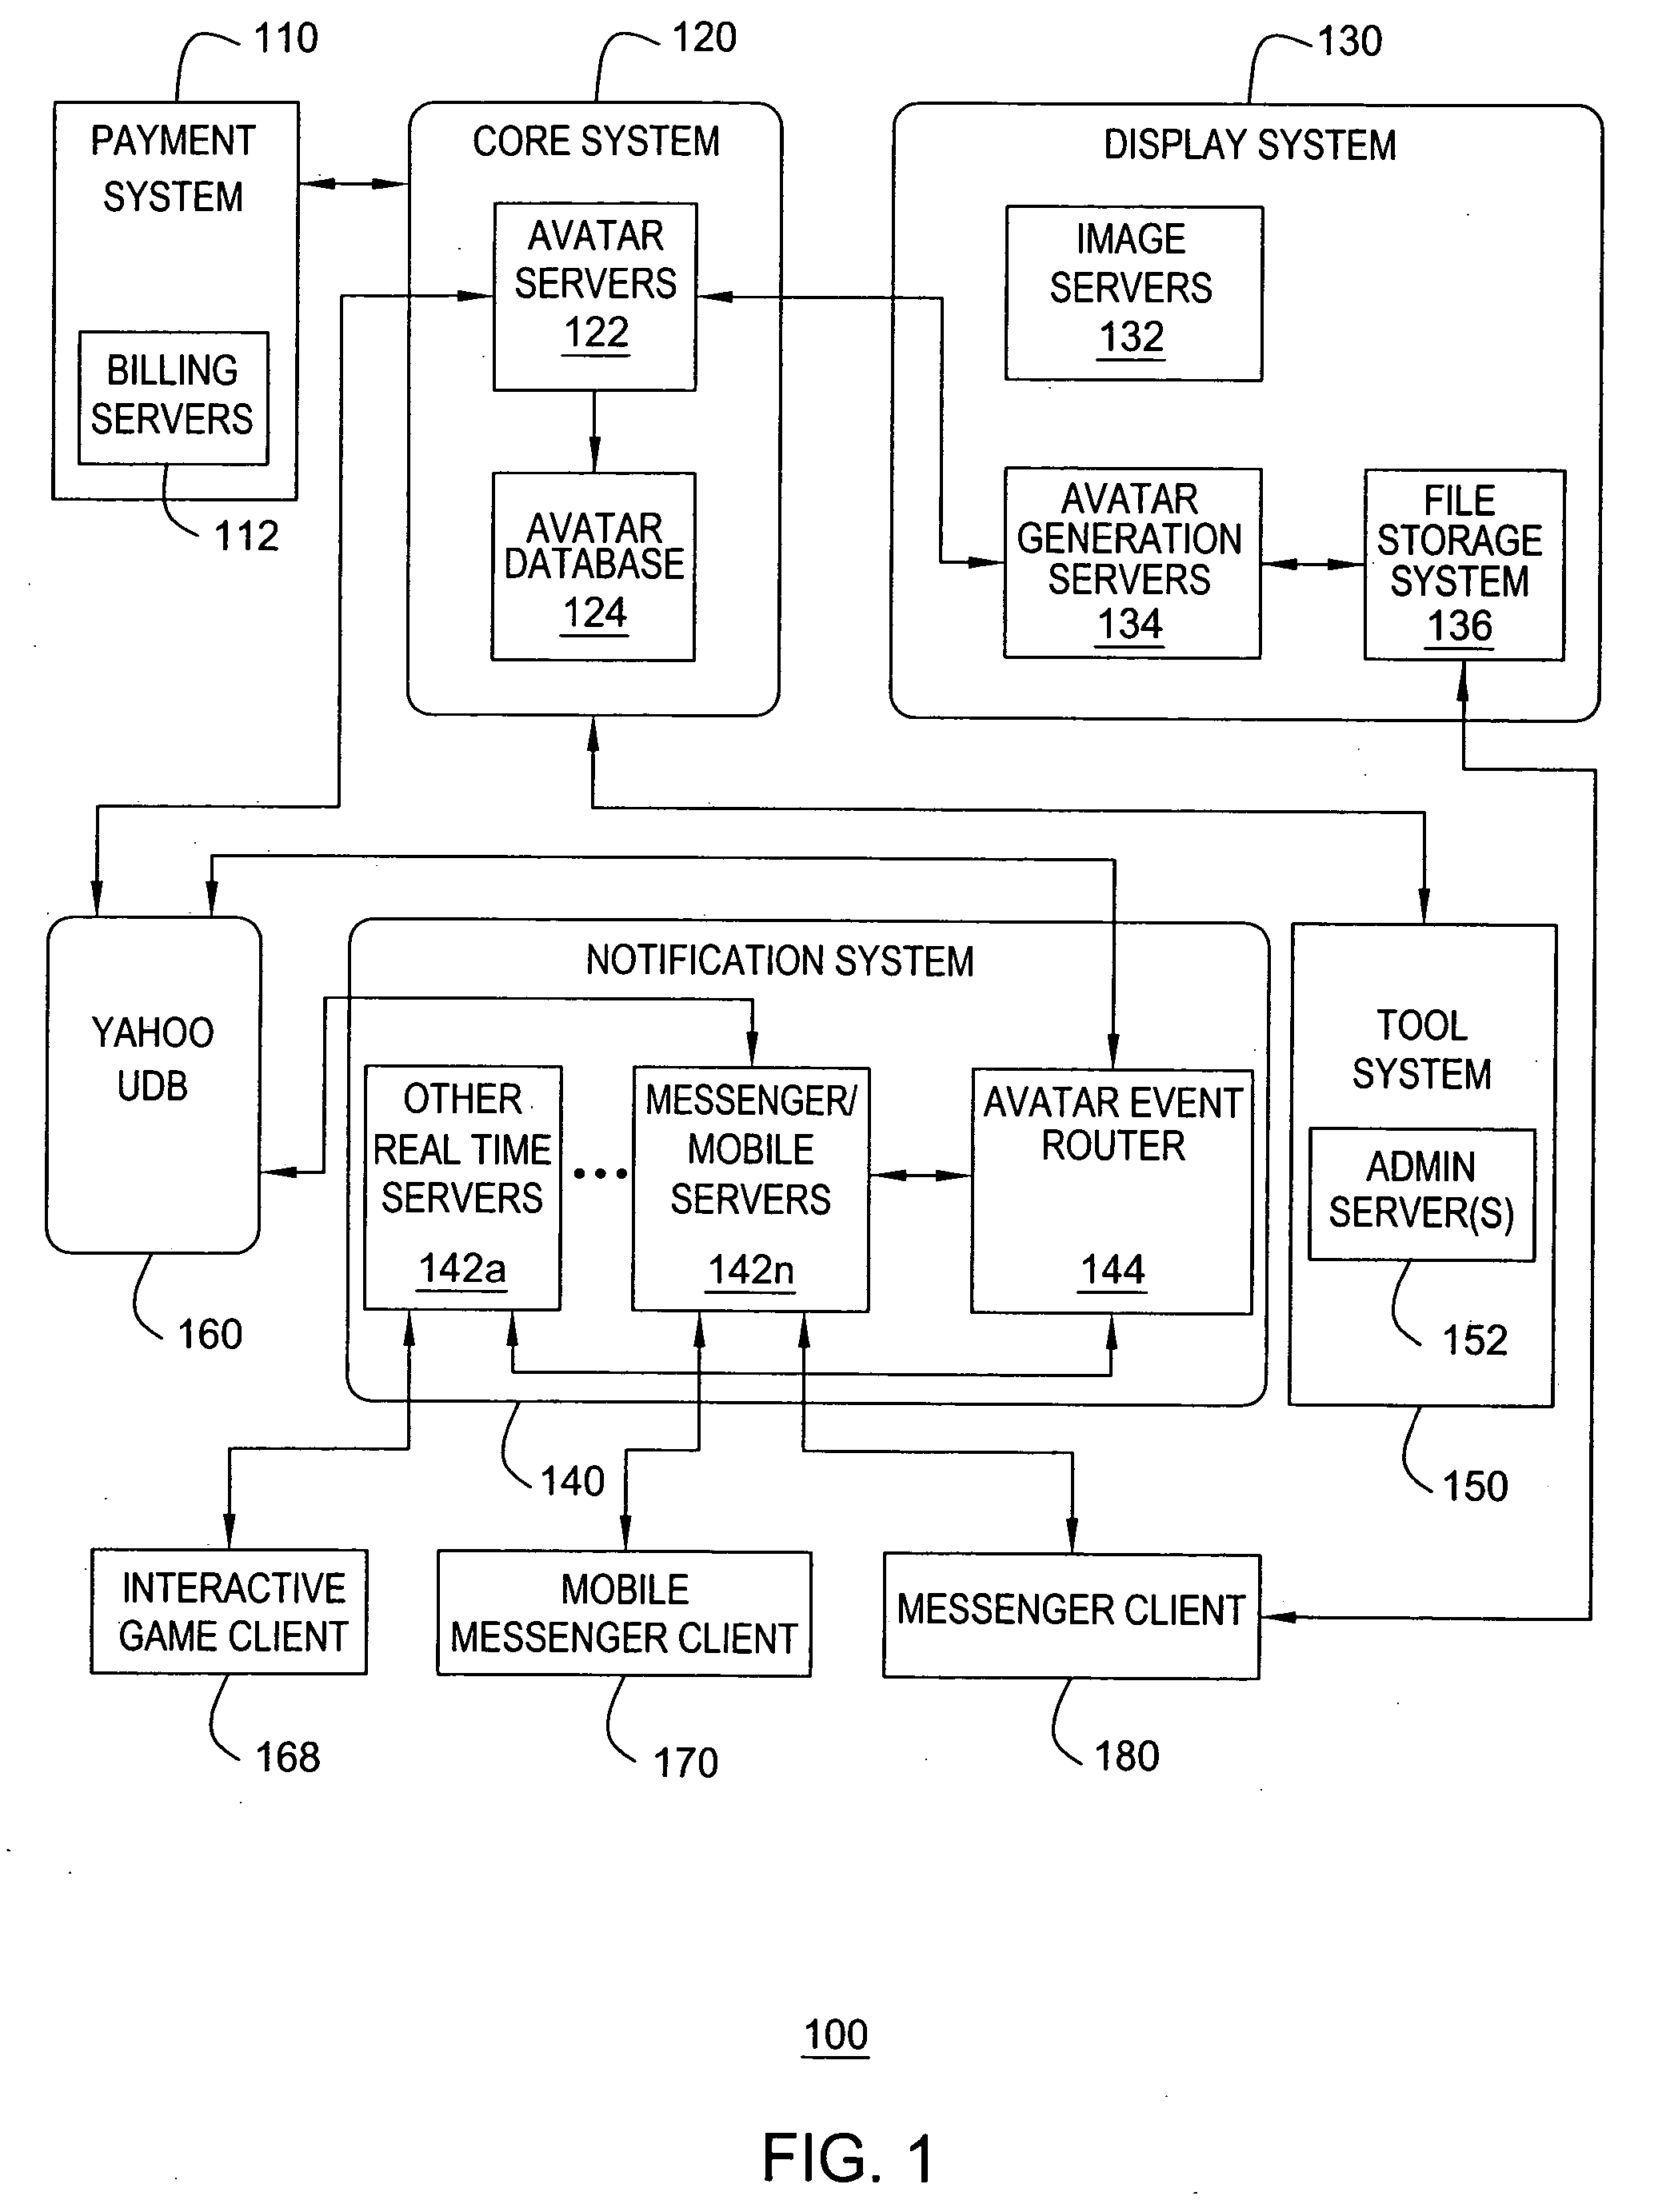 Method and apparatus for providing real-time notification for avatars